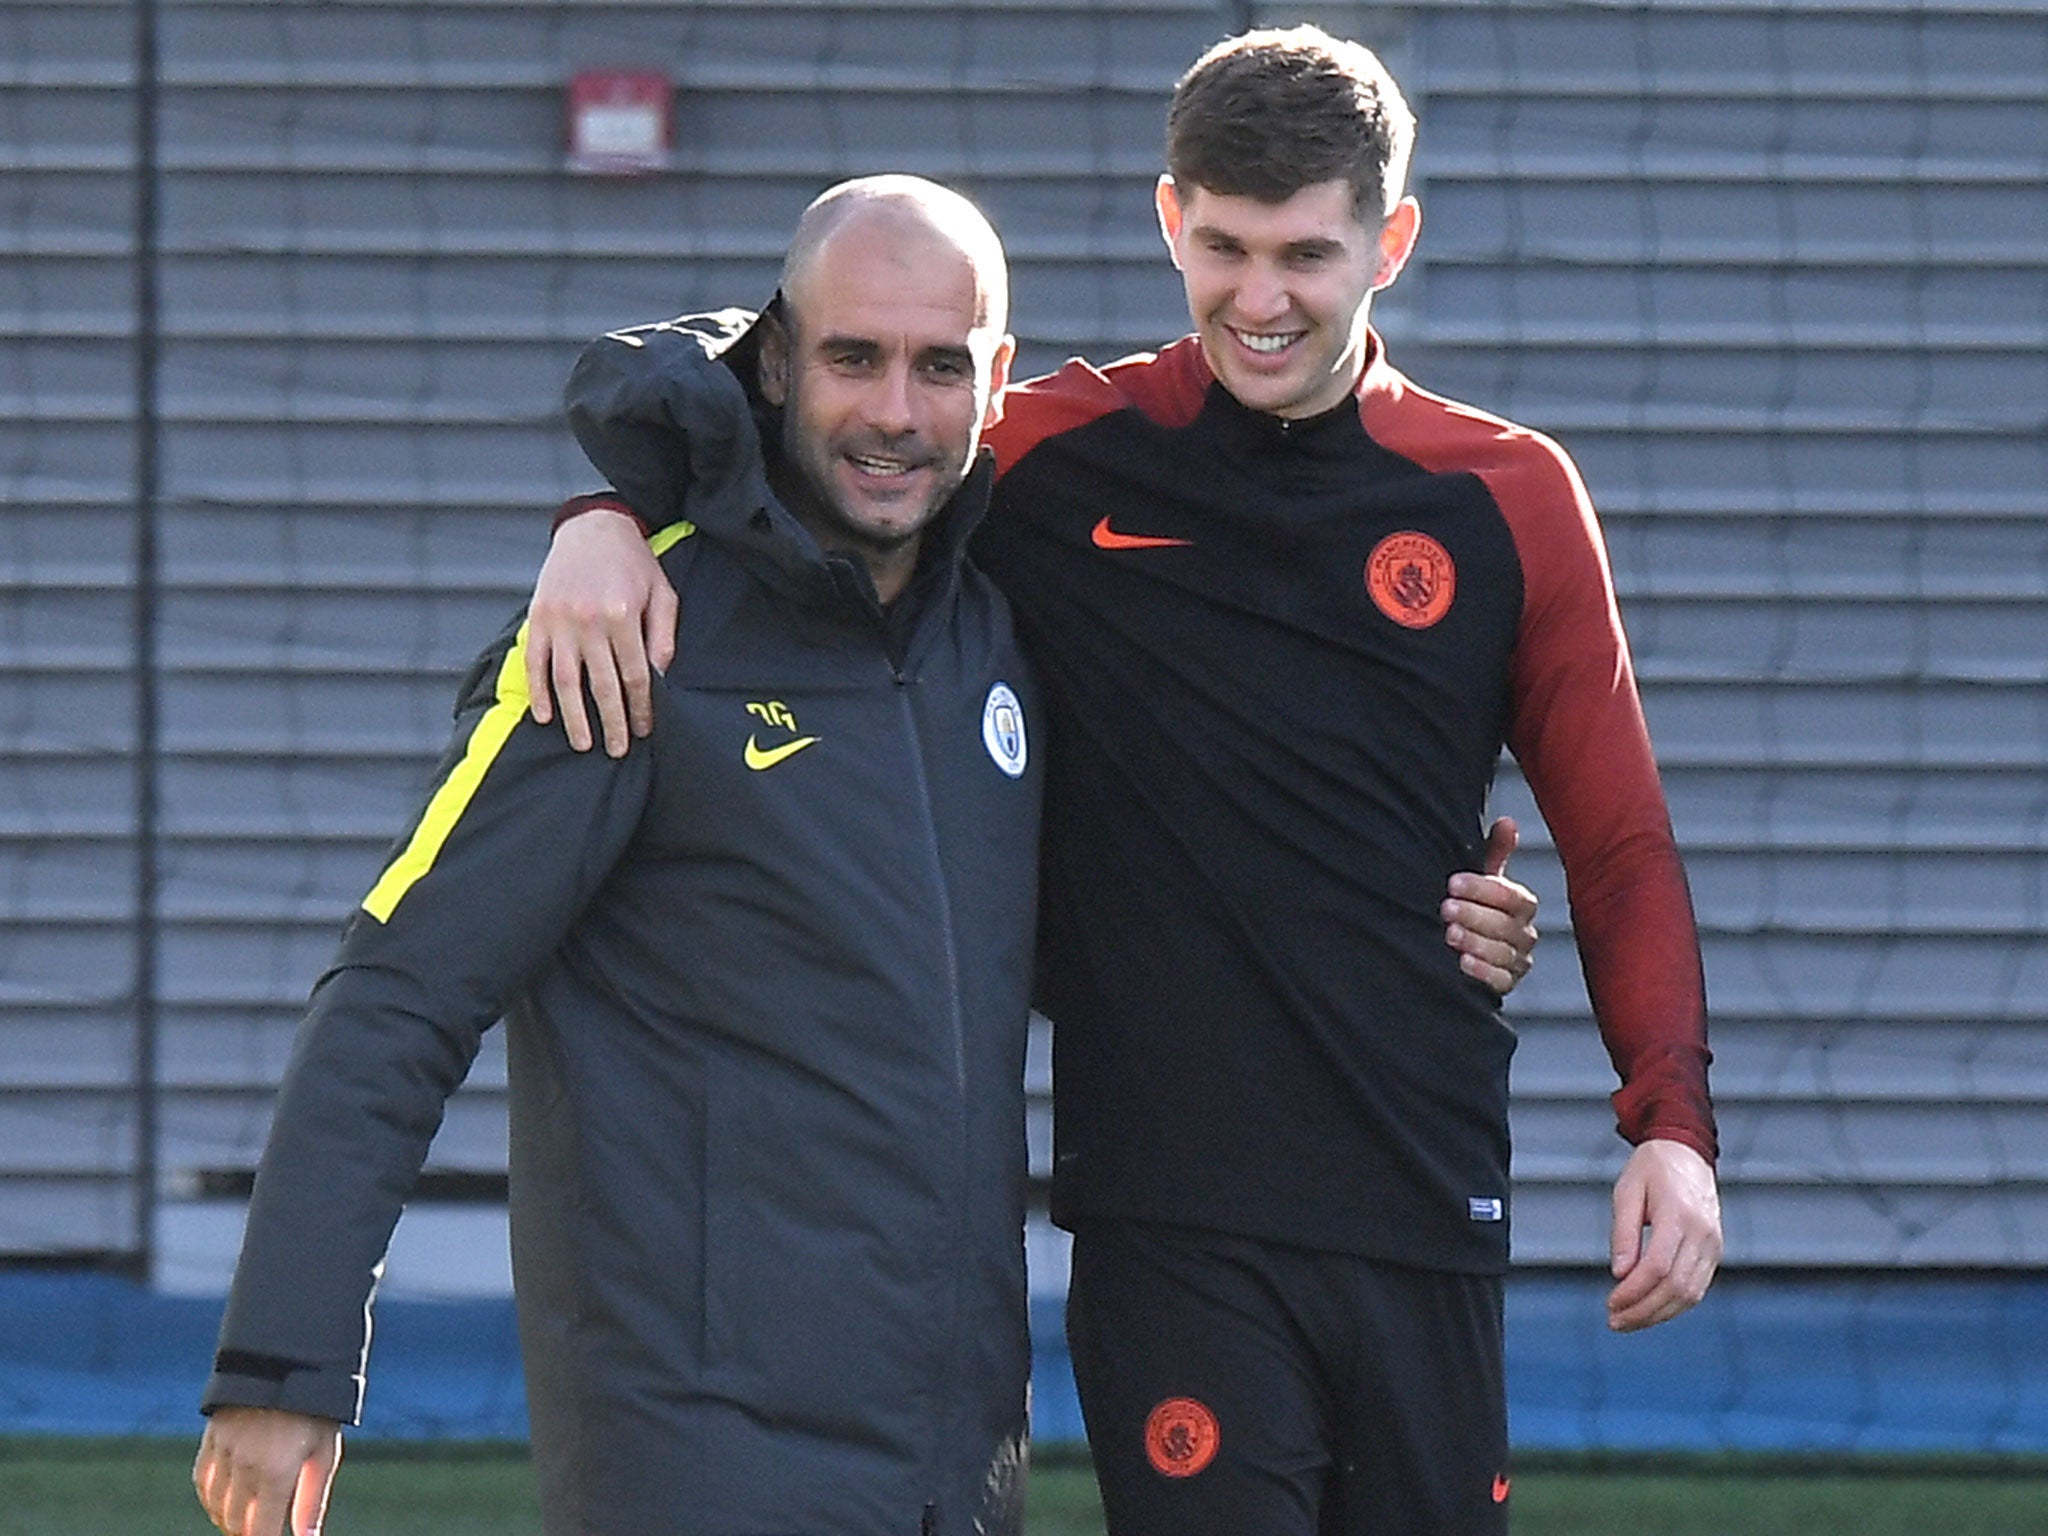 Pep Guardiola says he will not change his approach in handling Manchester City defender John Stones